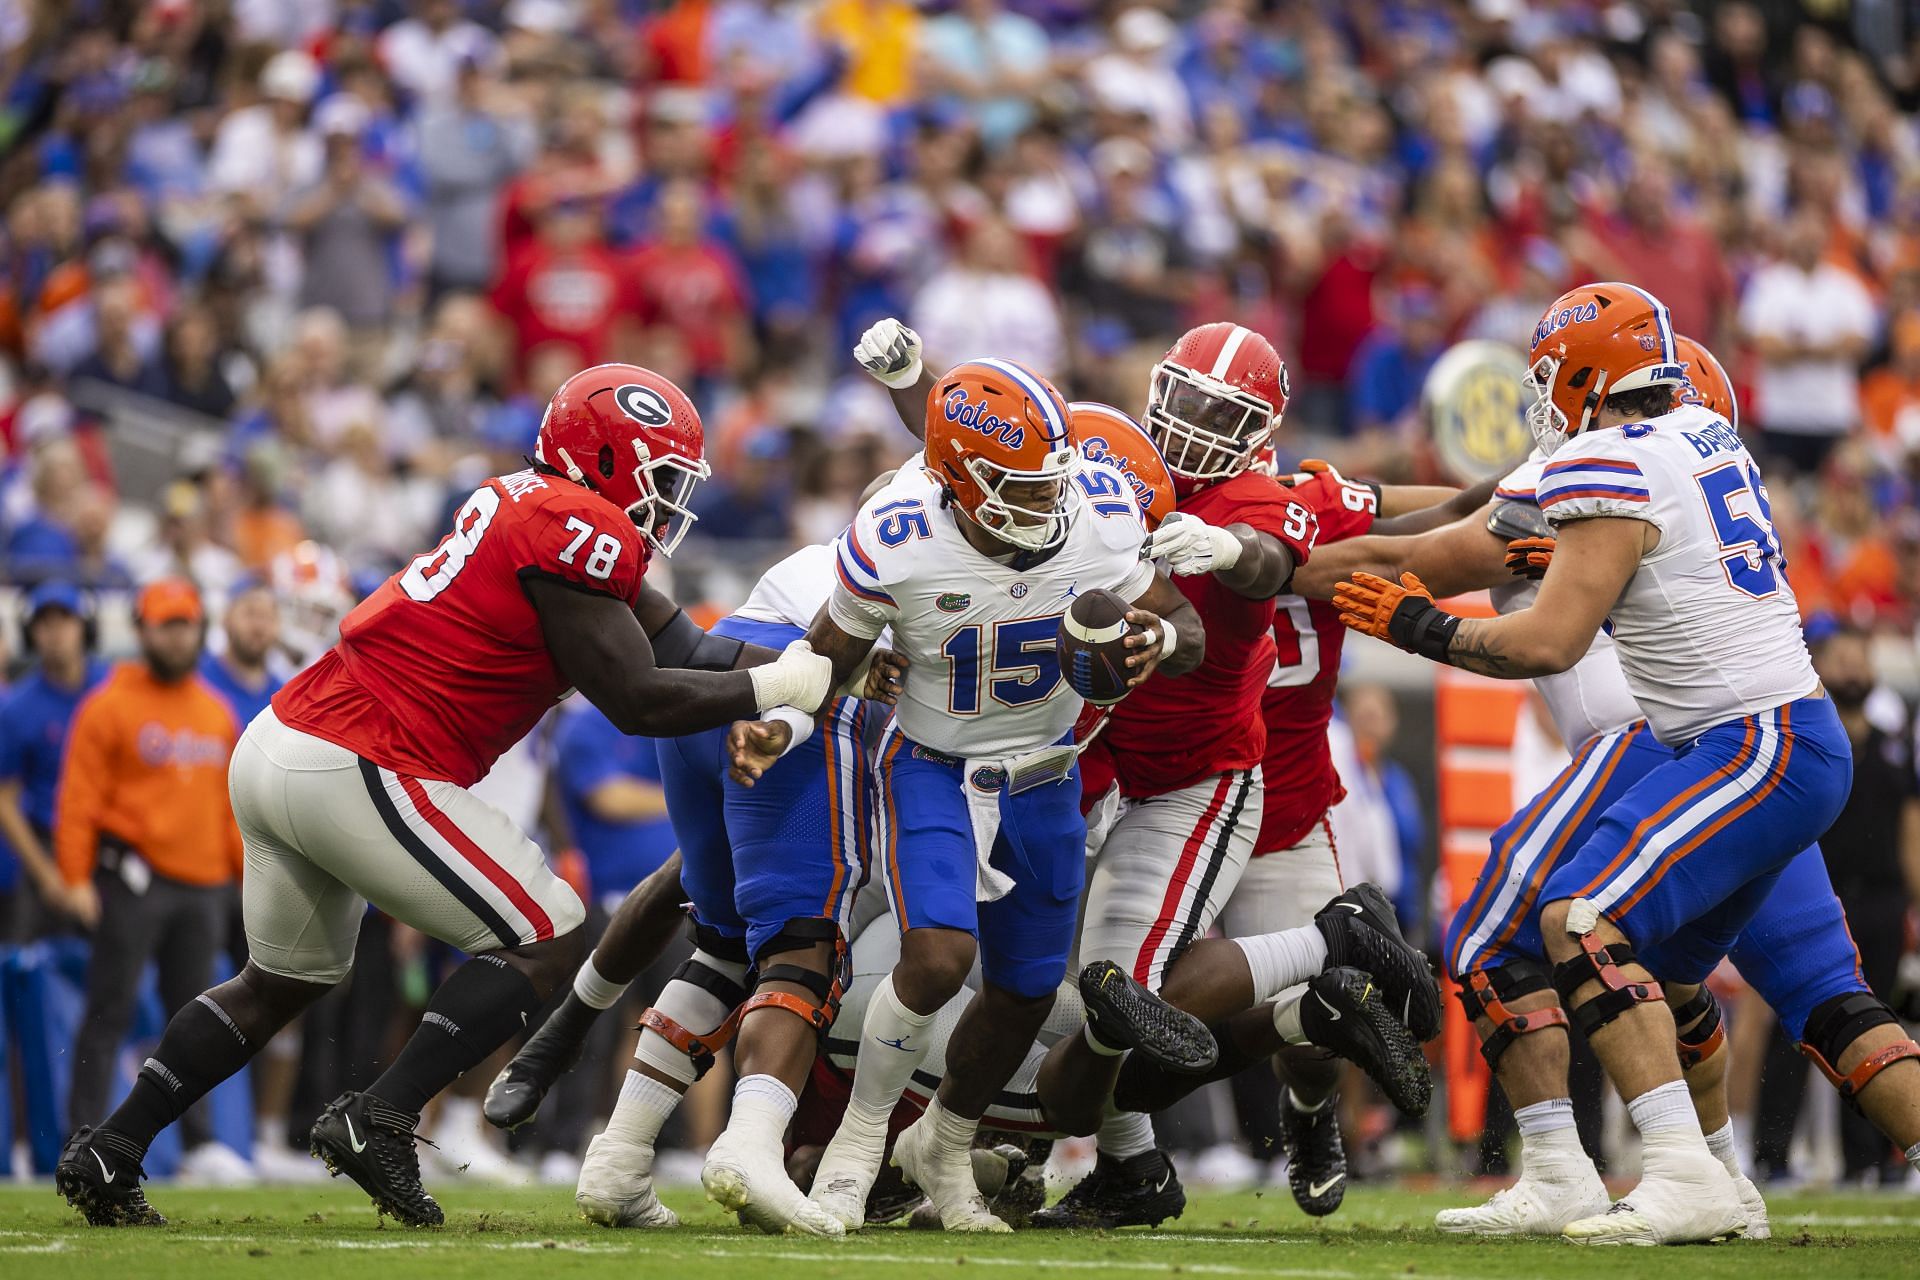 Anthony Richardson #15 of the Florida Gators is pressured by Nazir Stackhouse #78 of the Georgia Bulldogs 